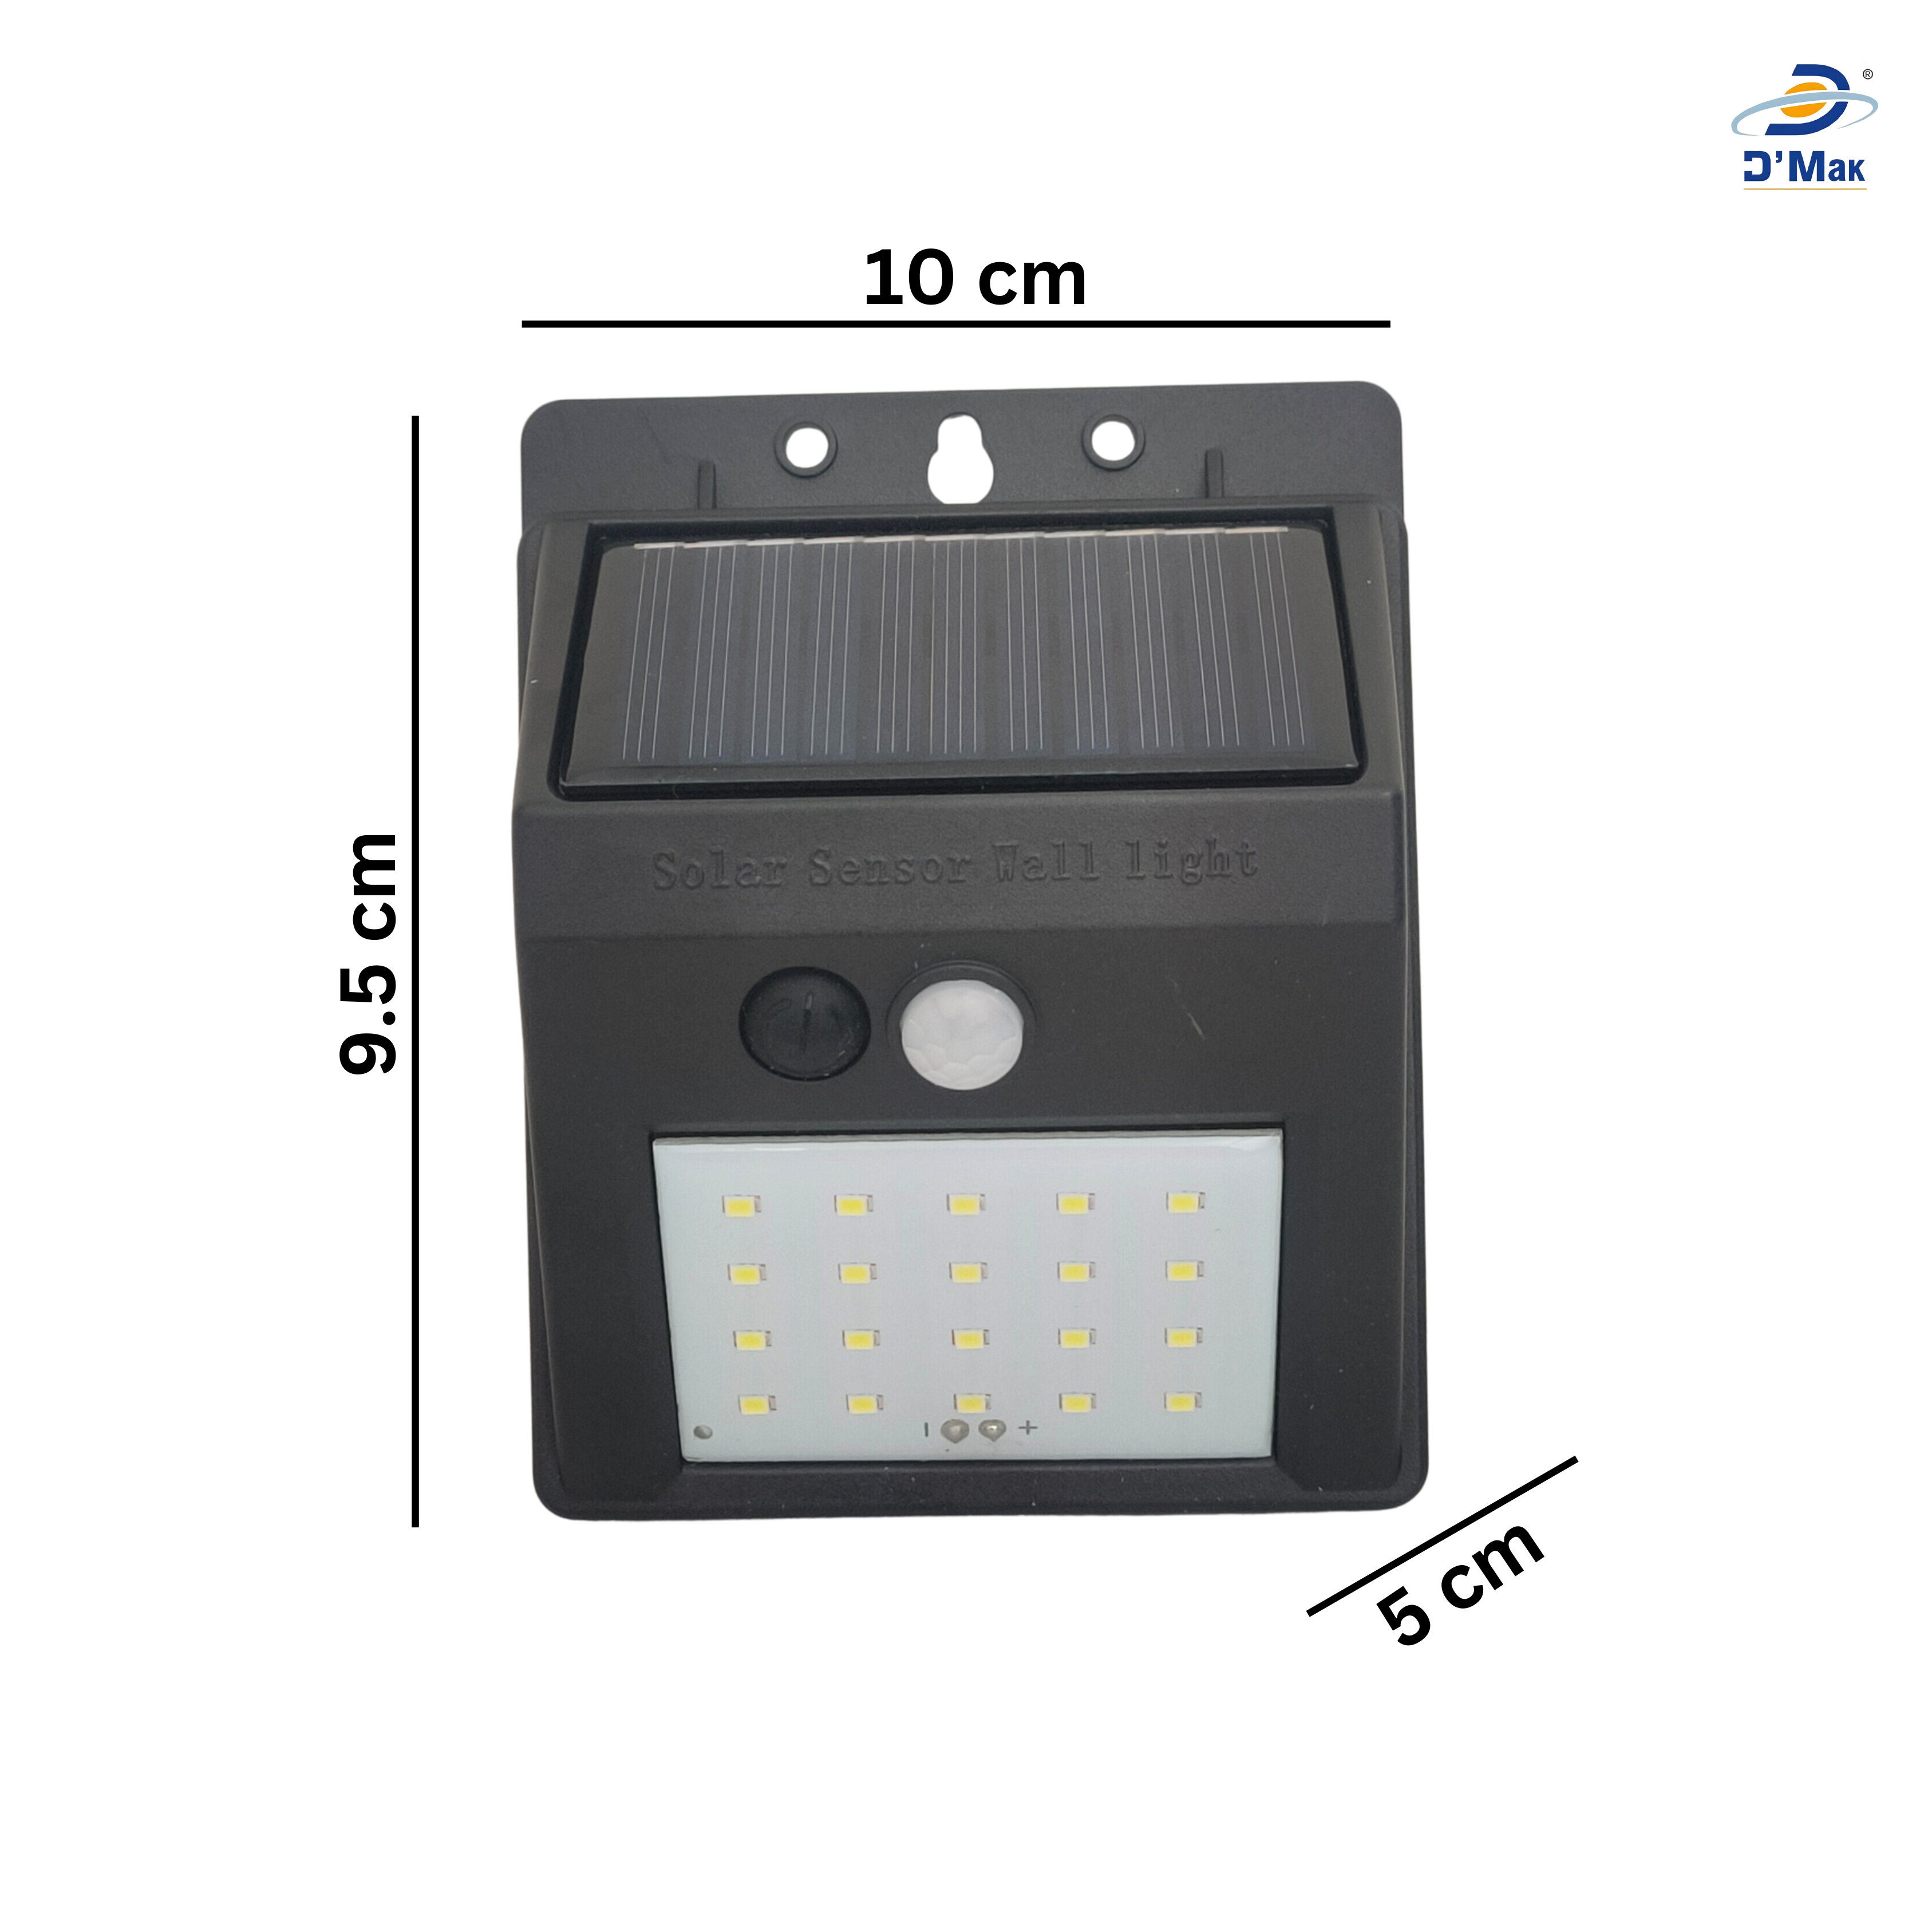 D'Mak Automatic Solar Motion Wall Light for Outdoor Purposes